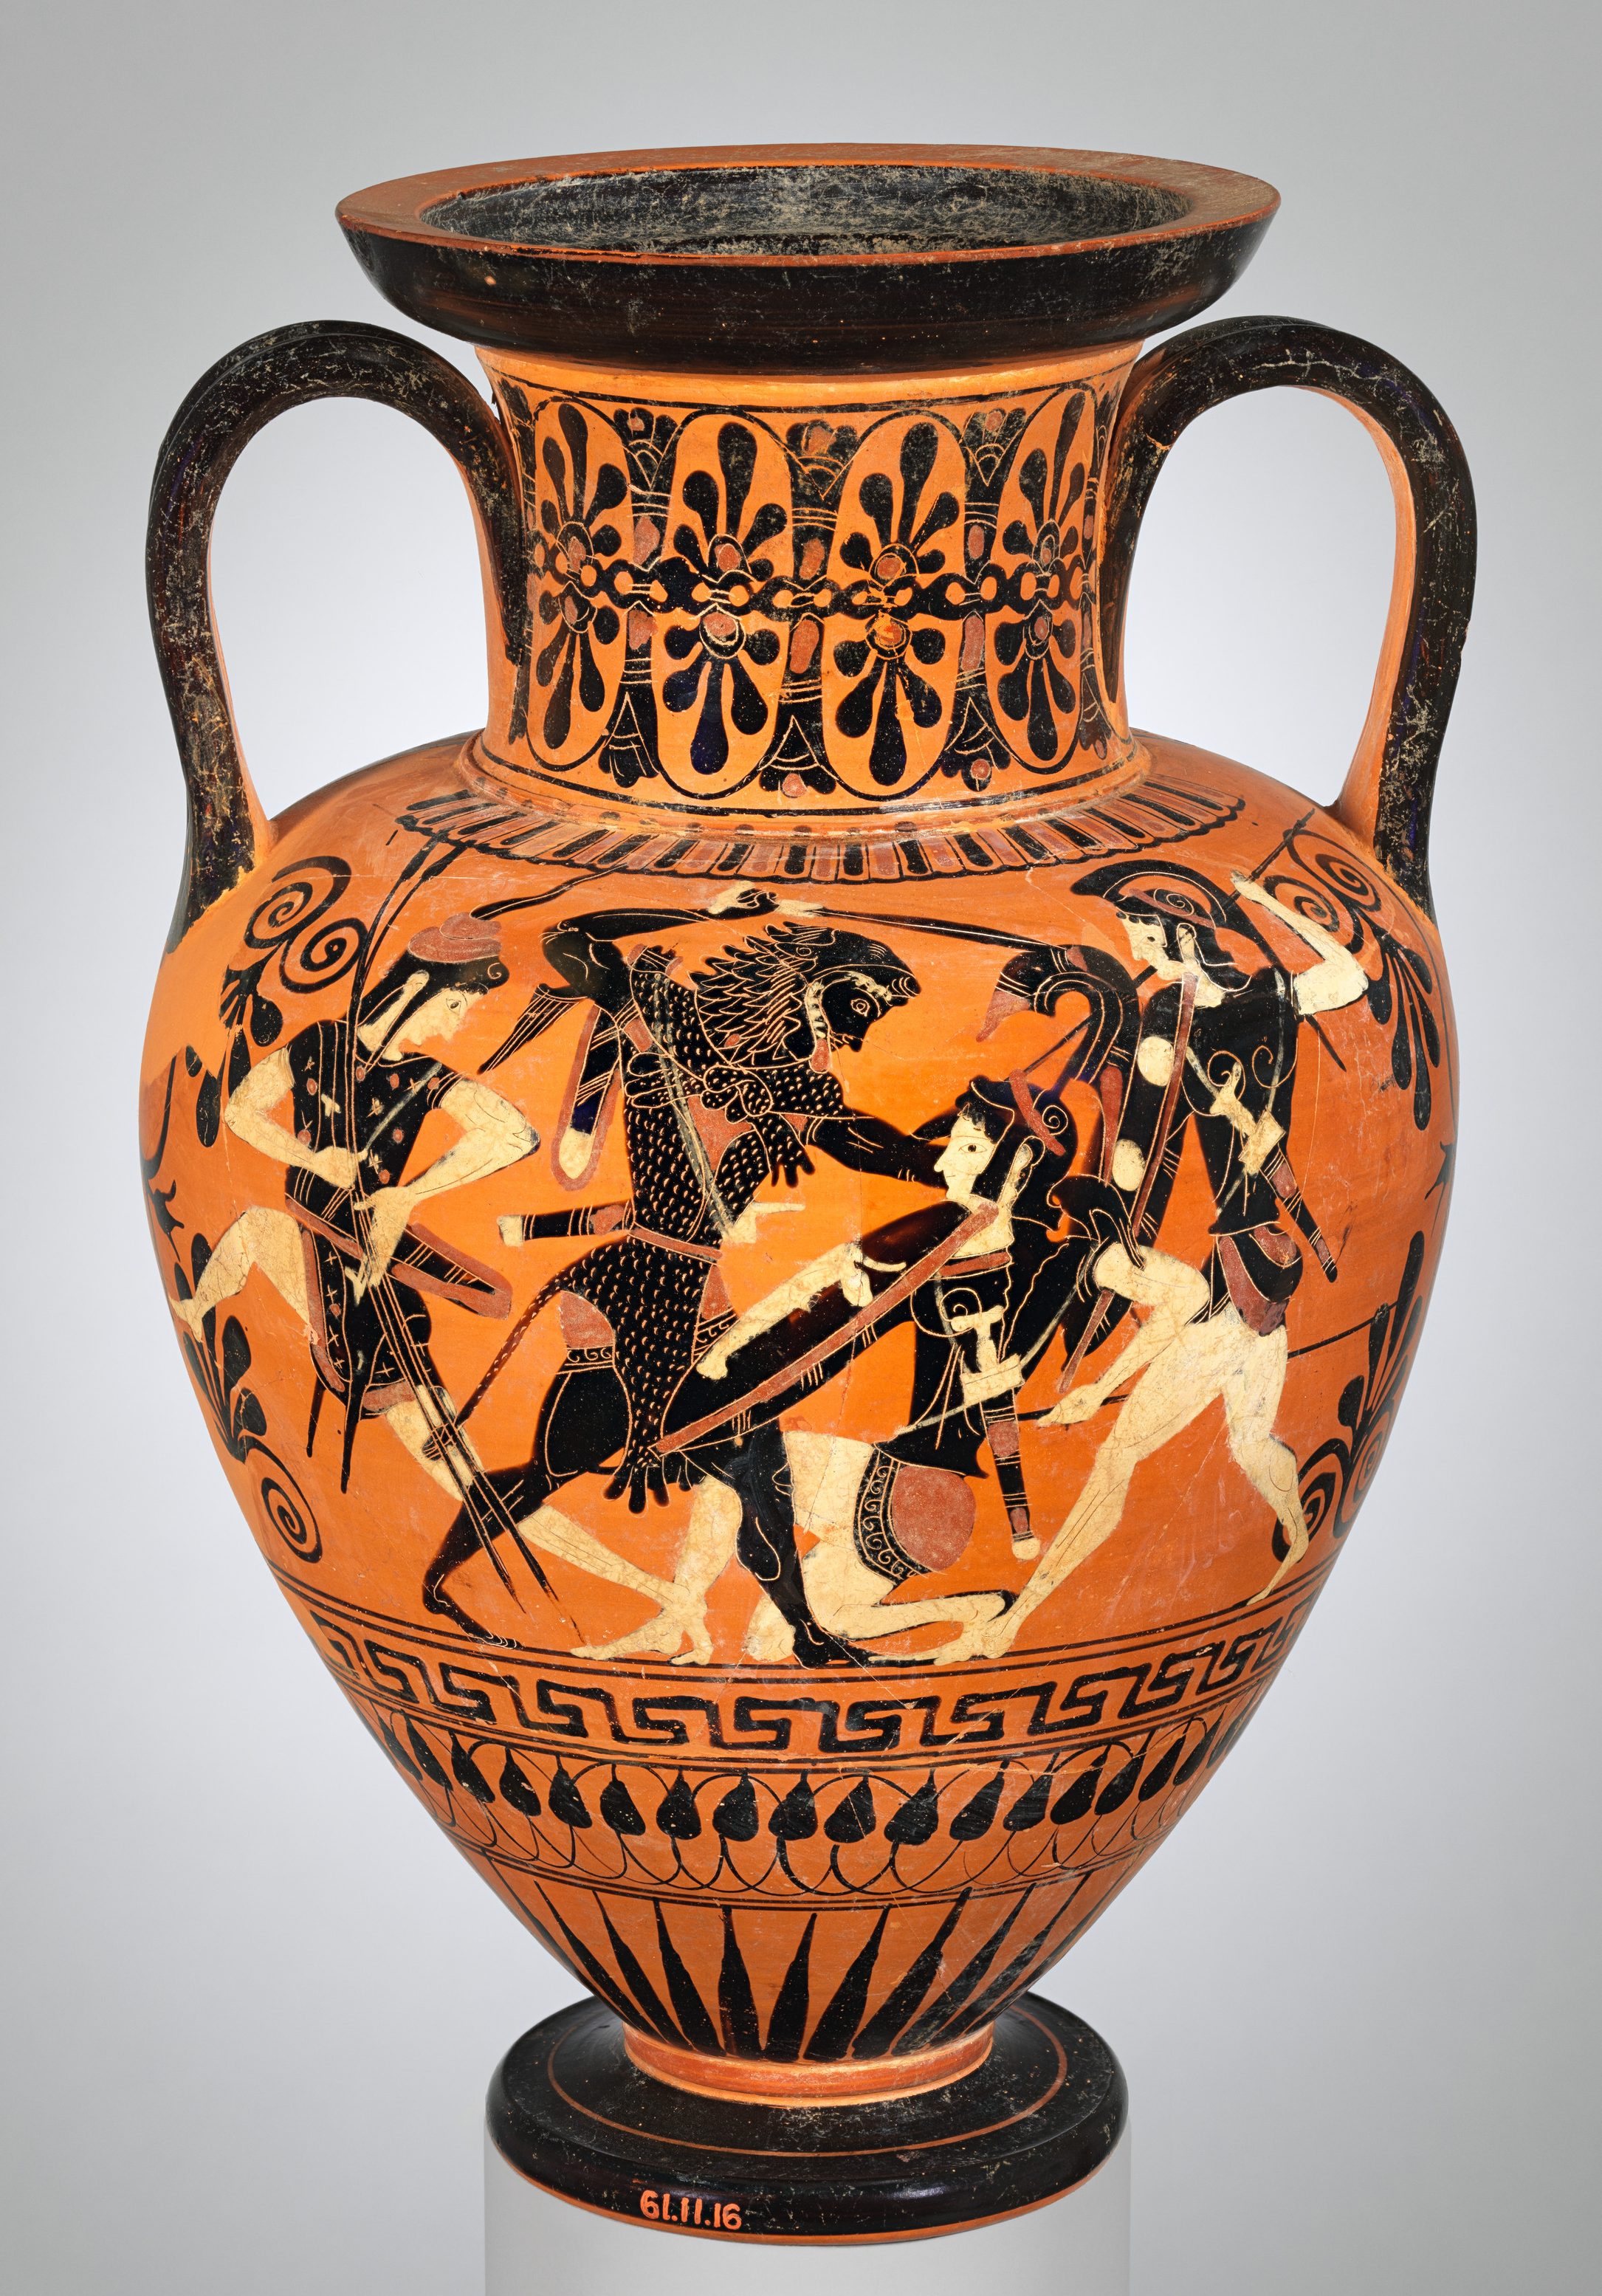 Heracles, wearing his lion skin, attacks an Amazon with a sword. Three Amazons fight him, with helms and spears.